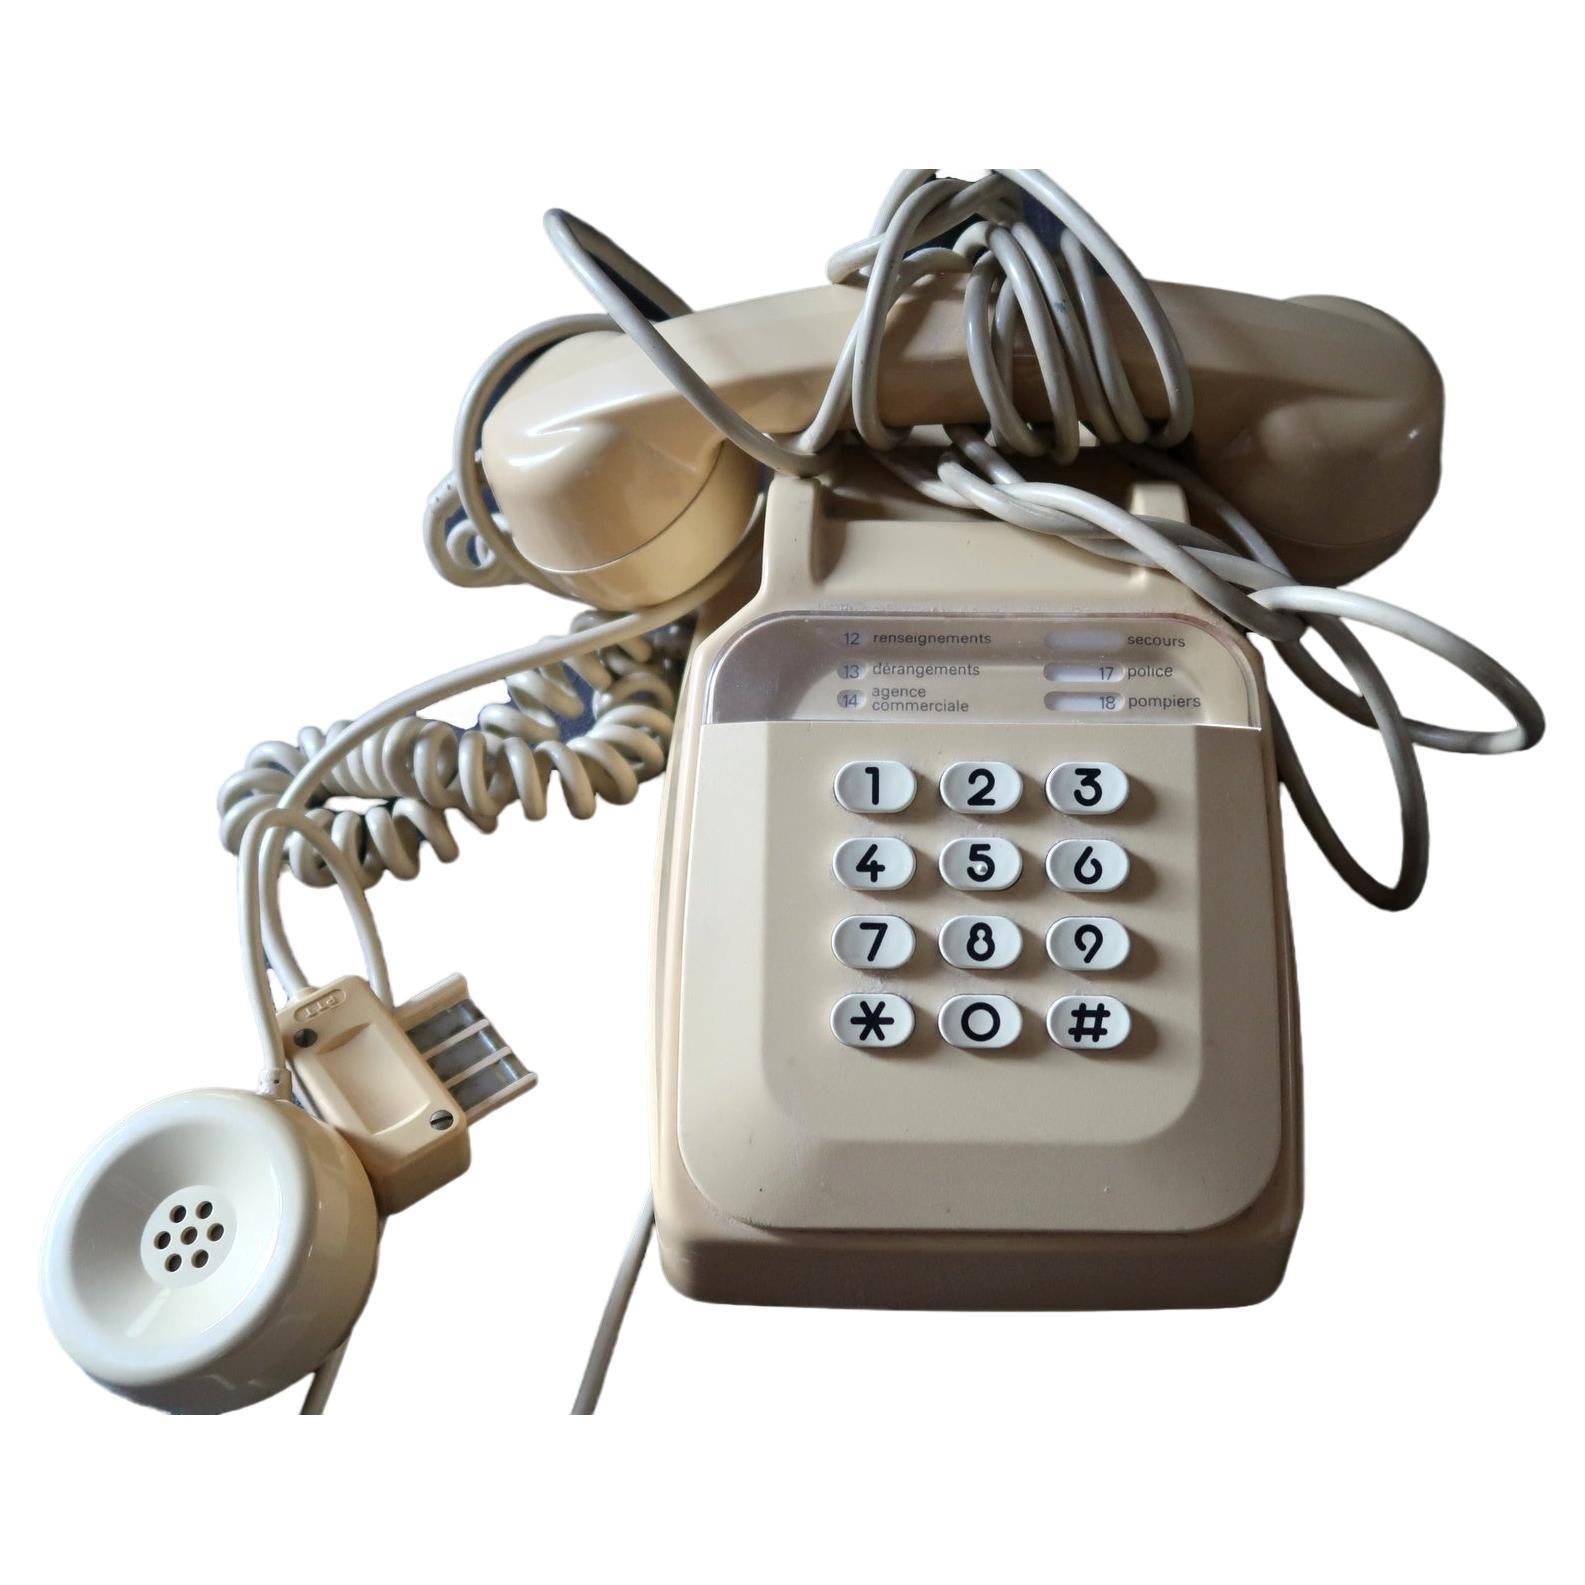 Vintage Beige Buttoned House Phone - Retro Elegance from France - 2C02 For Sale